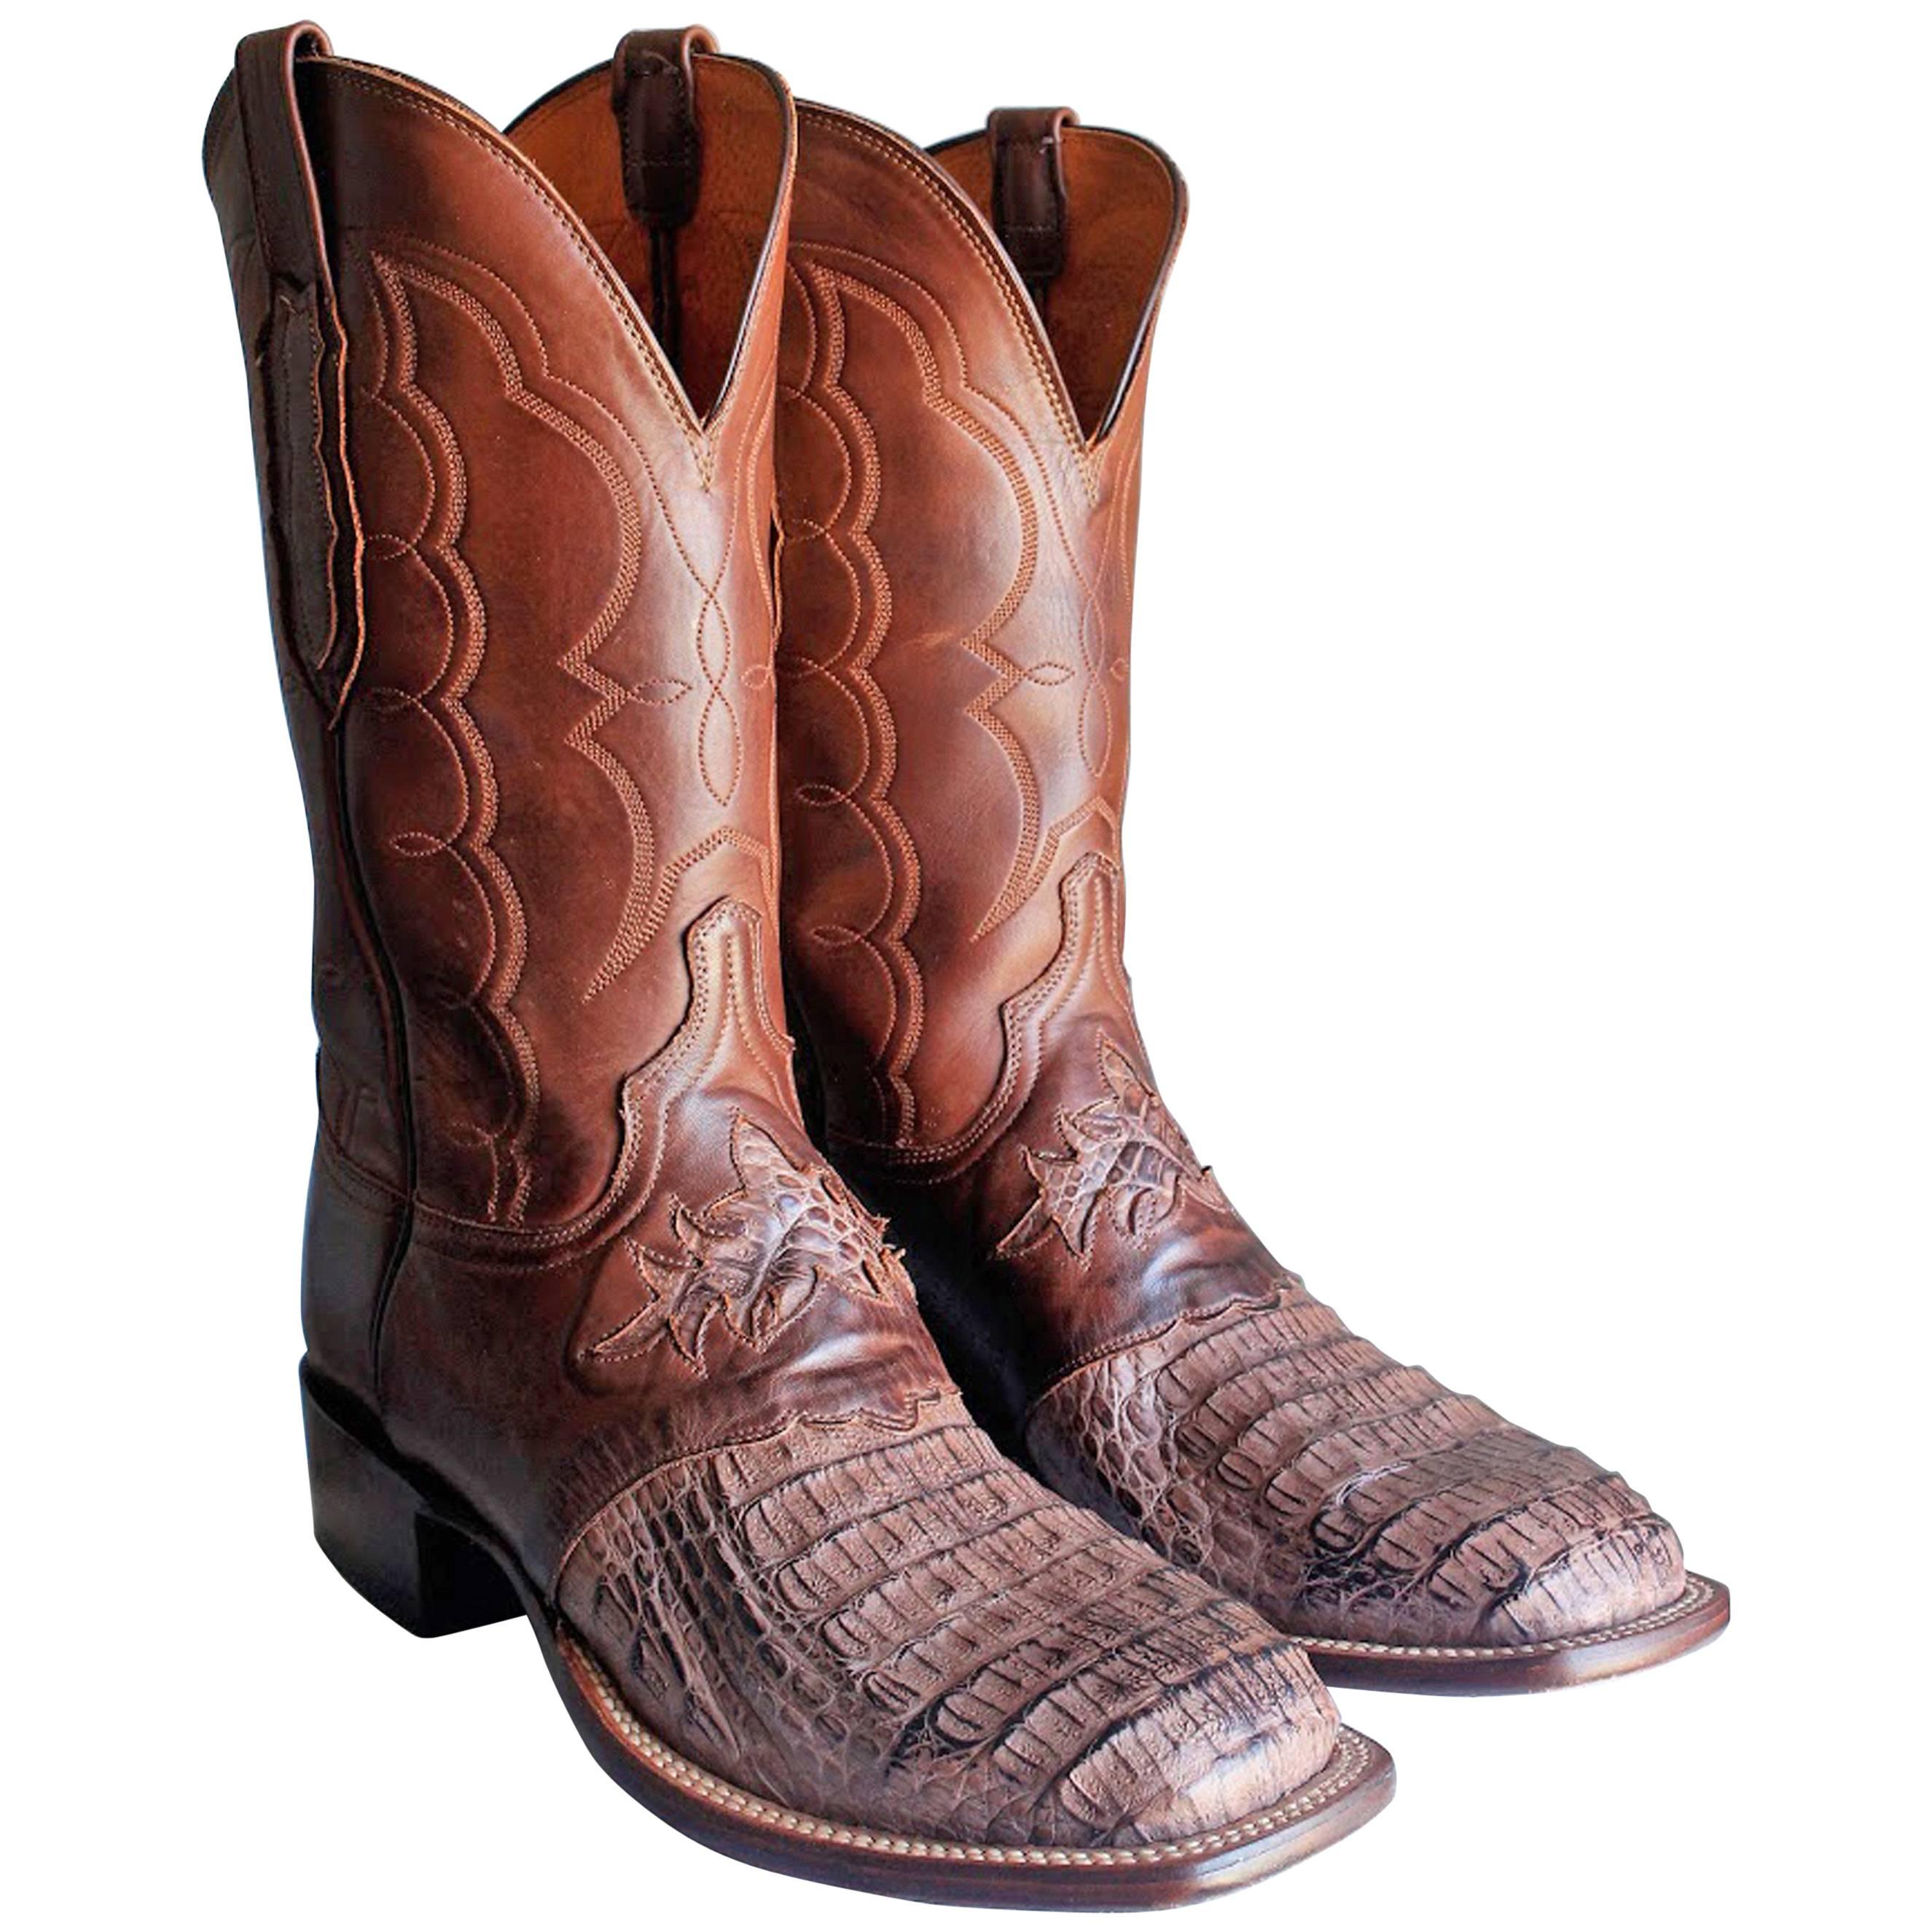 Lucchese Boots Men's Burnished Tan Caiman Croc Boxed 10EE Extra Wide CL1064